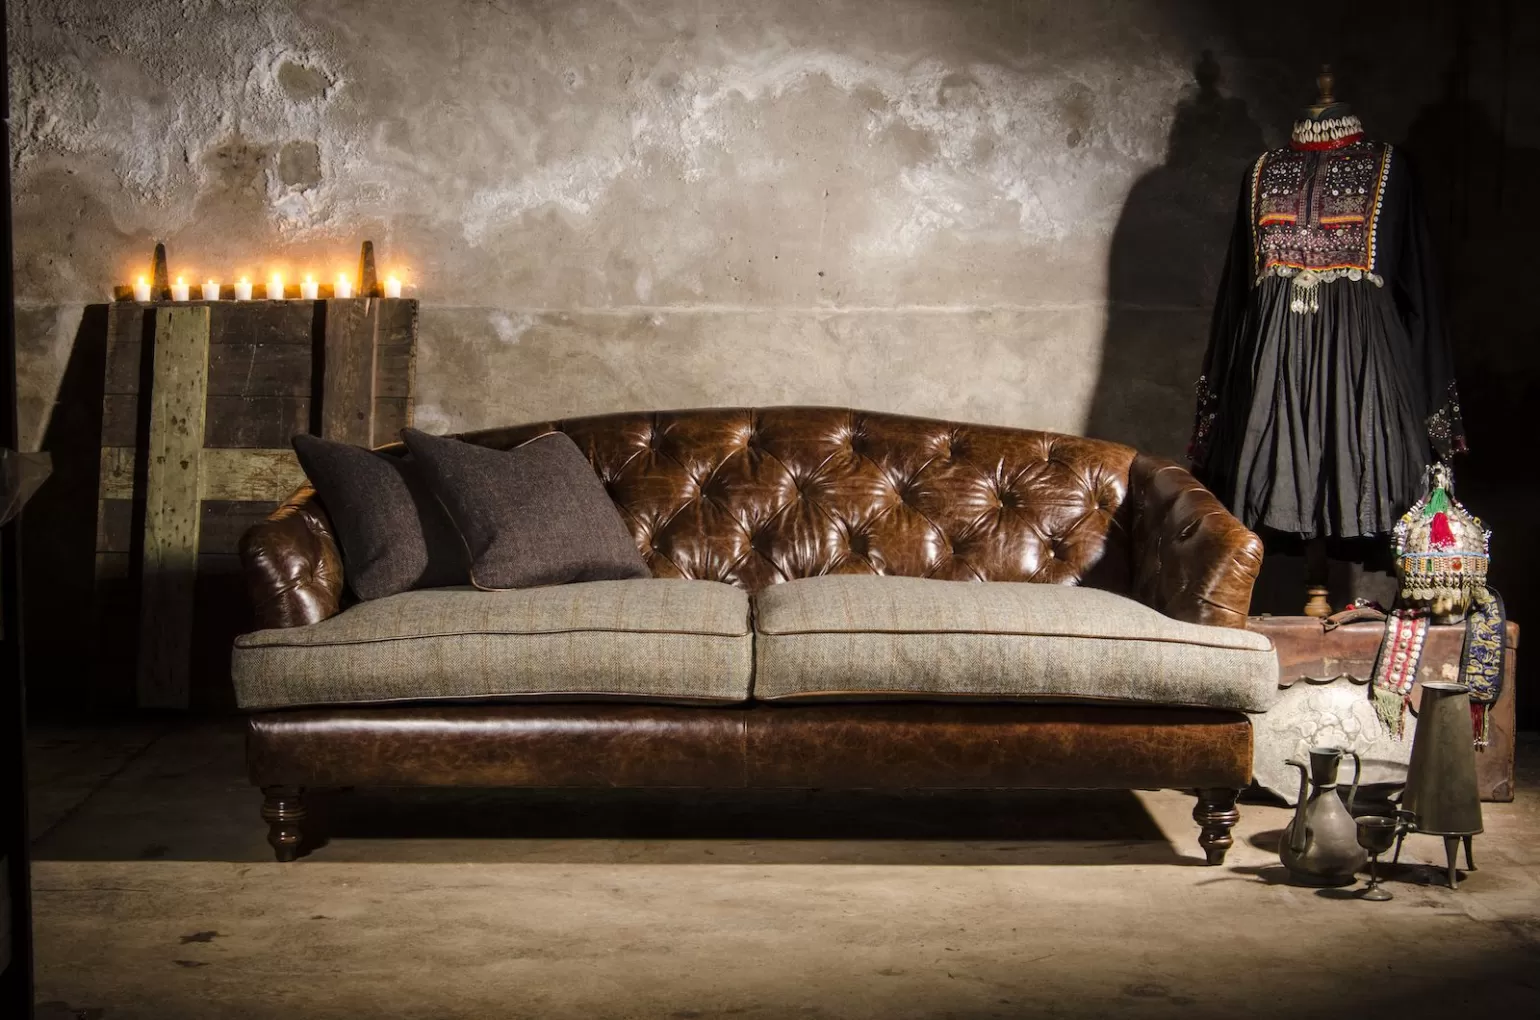 The tweed collection boasts an array of tweed styles. Some include a mixture of leather and tweed while others use just fabric tweed designs. All are traditional and incredibly timeless for any home.
